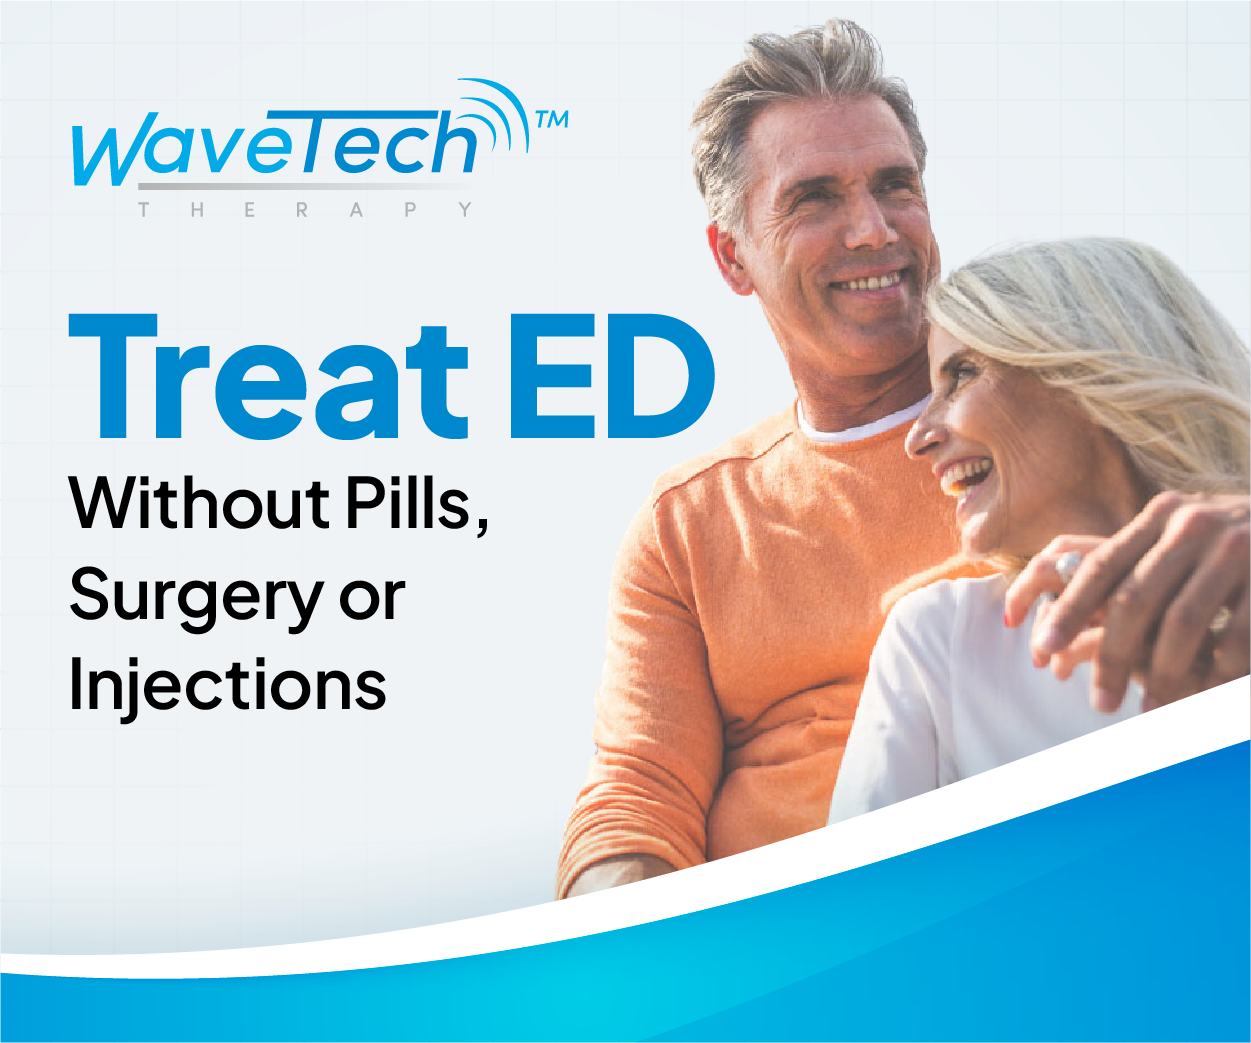 WaveTech Therapy